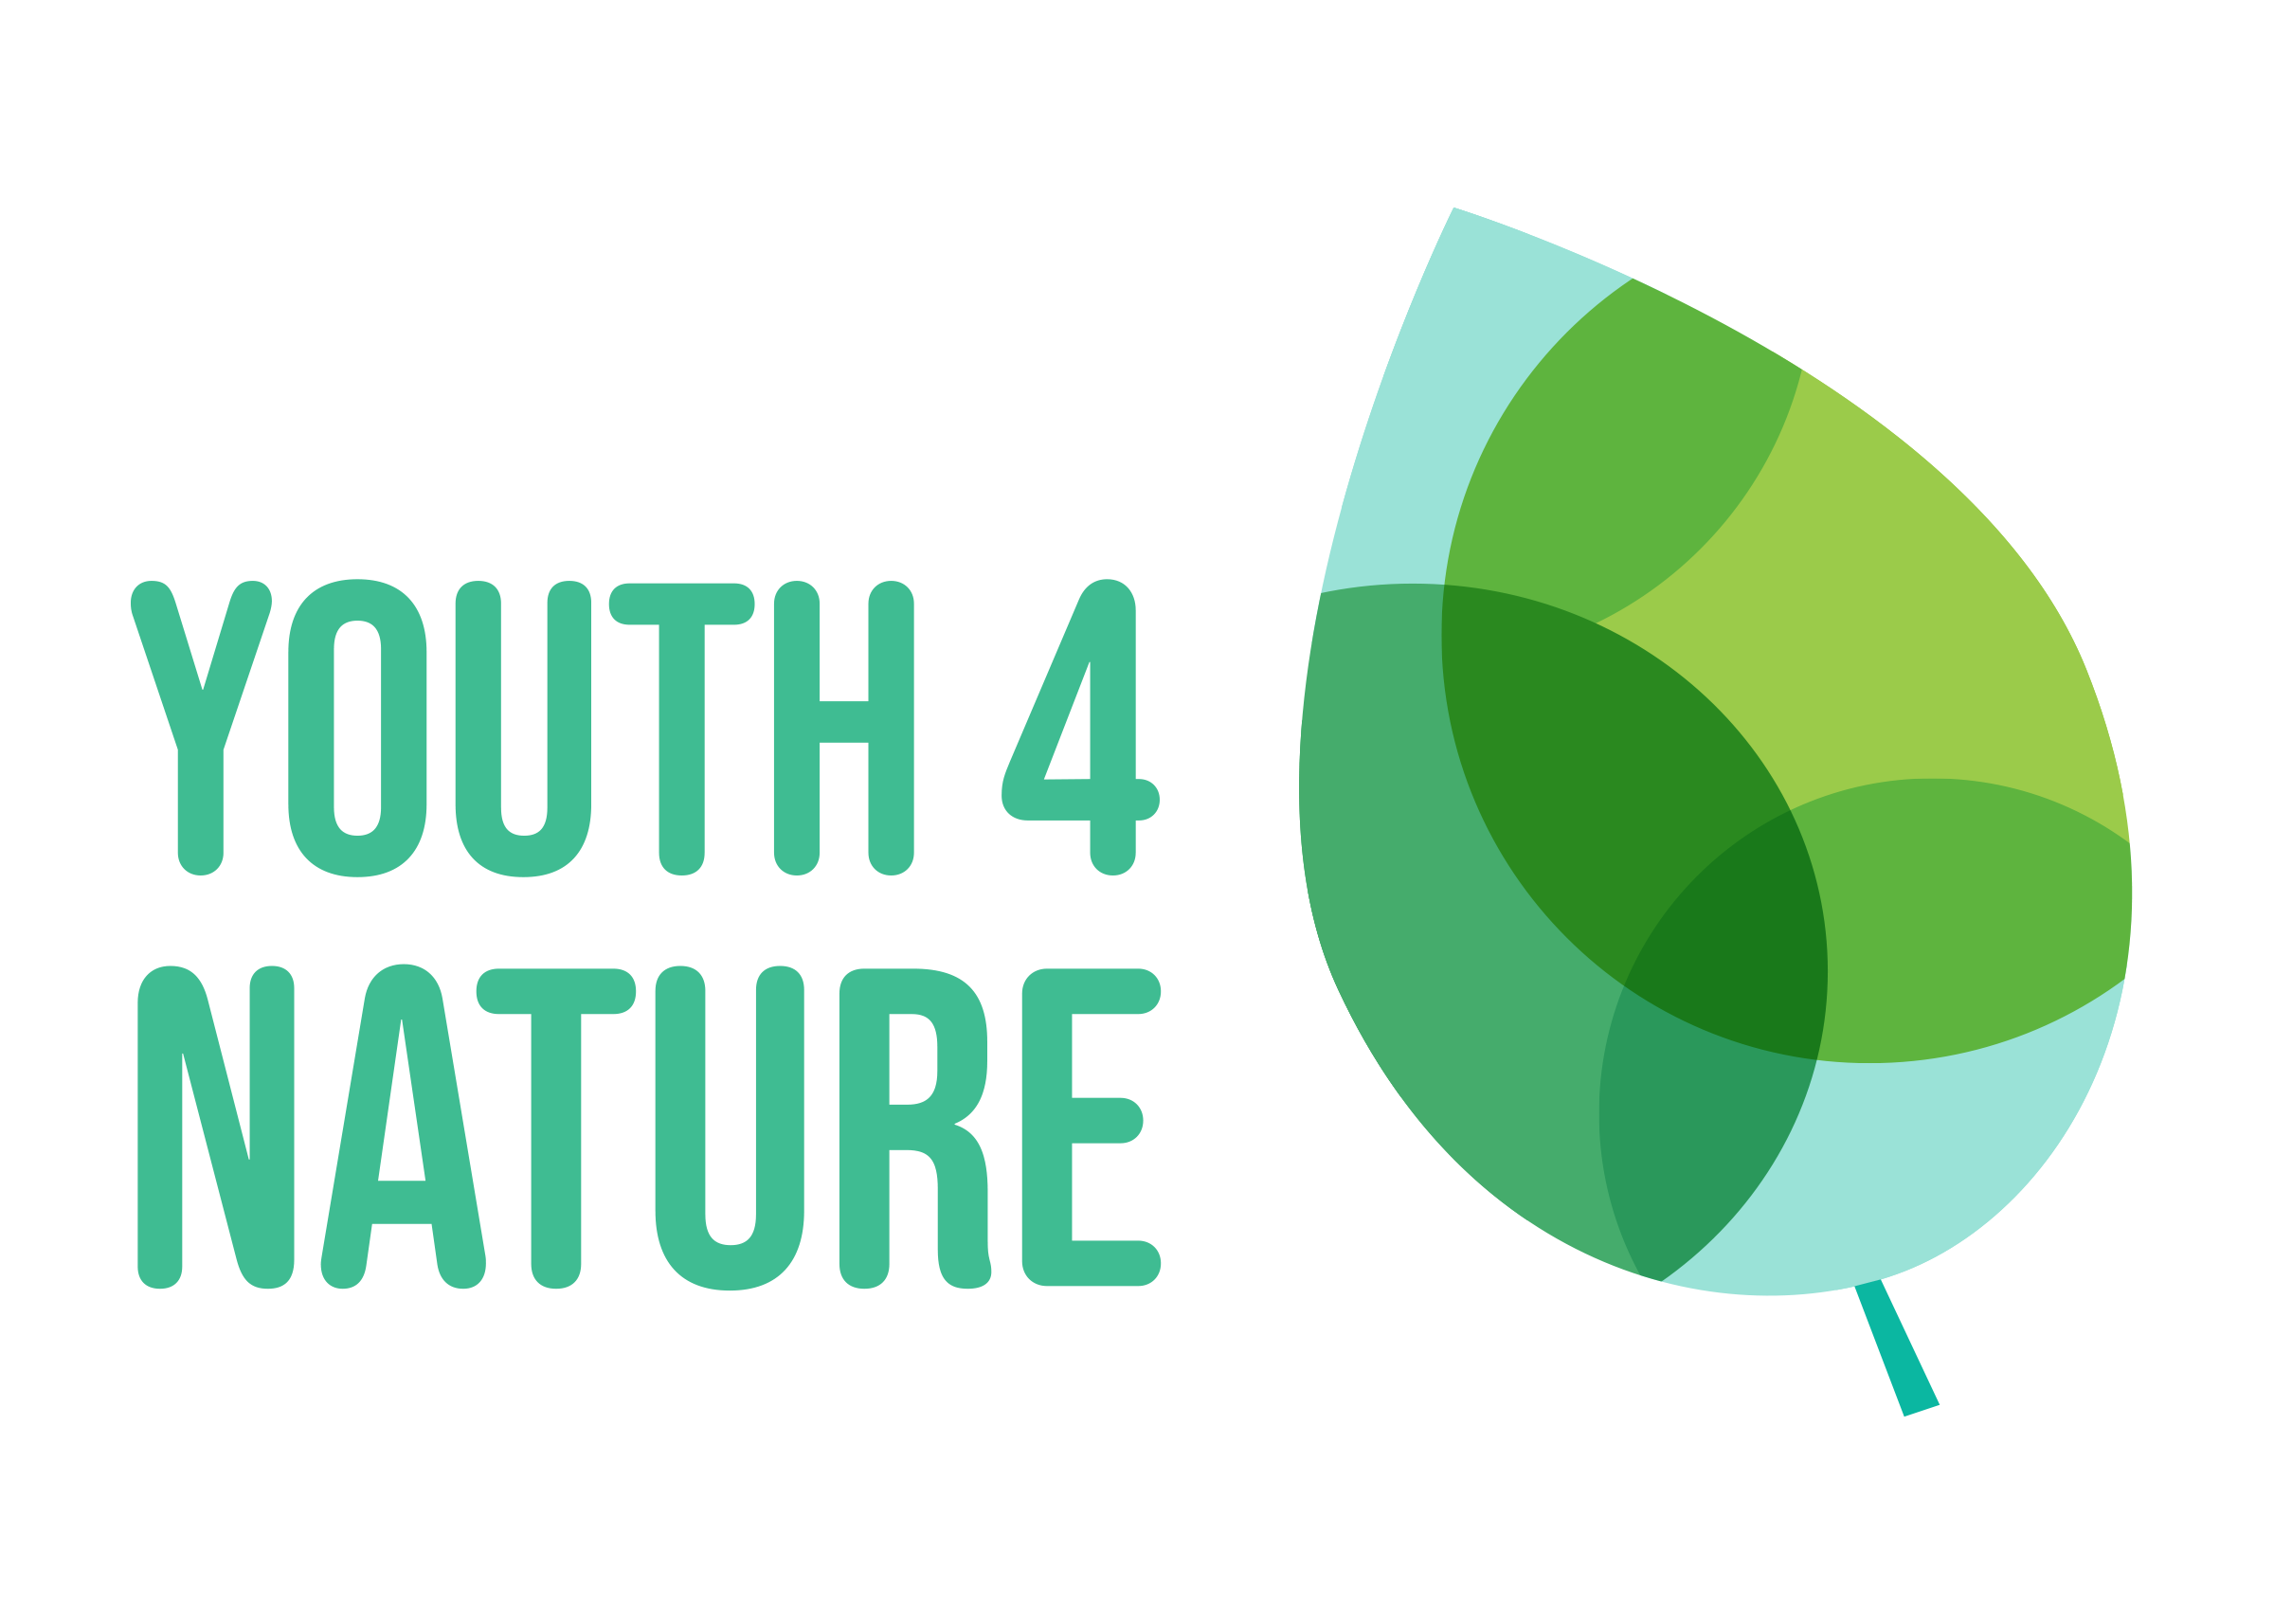 Youth Voices Nature — Major Group for Children and Youth